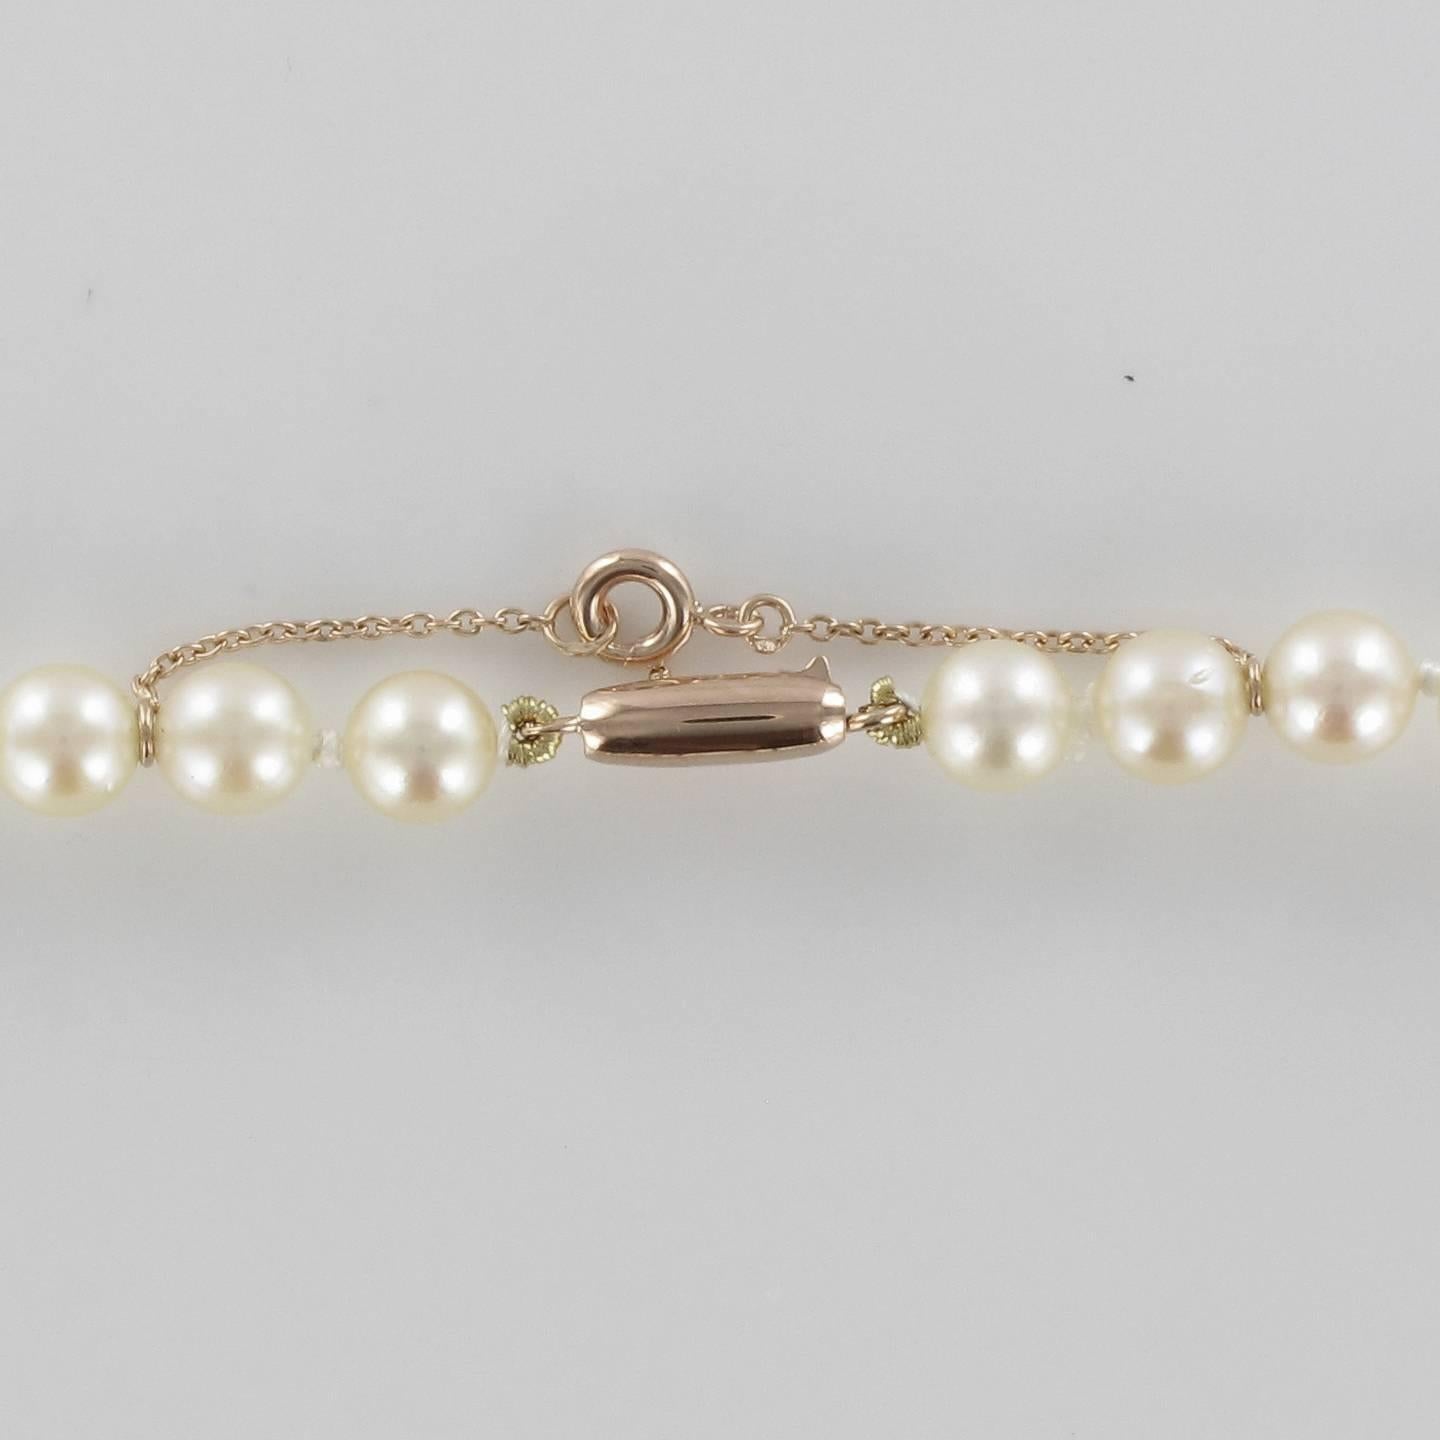 Retro French 1950s Japanese Cultured Pearls Rose Gold Clasp Necklace